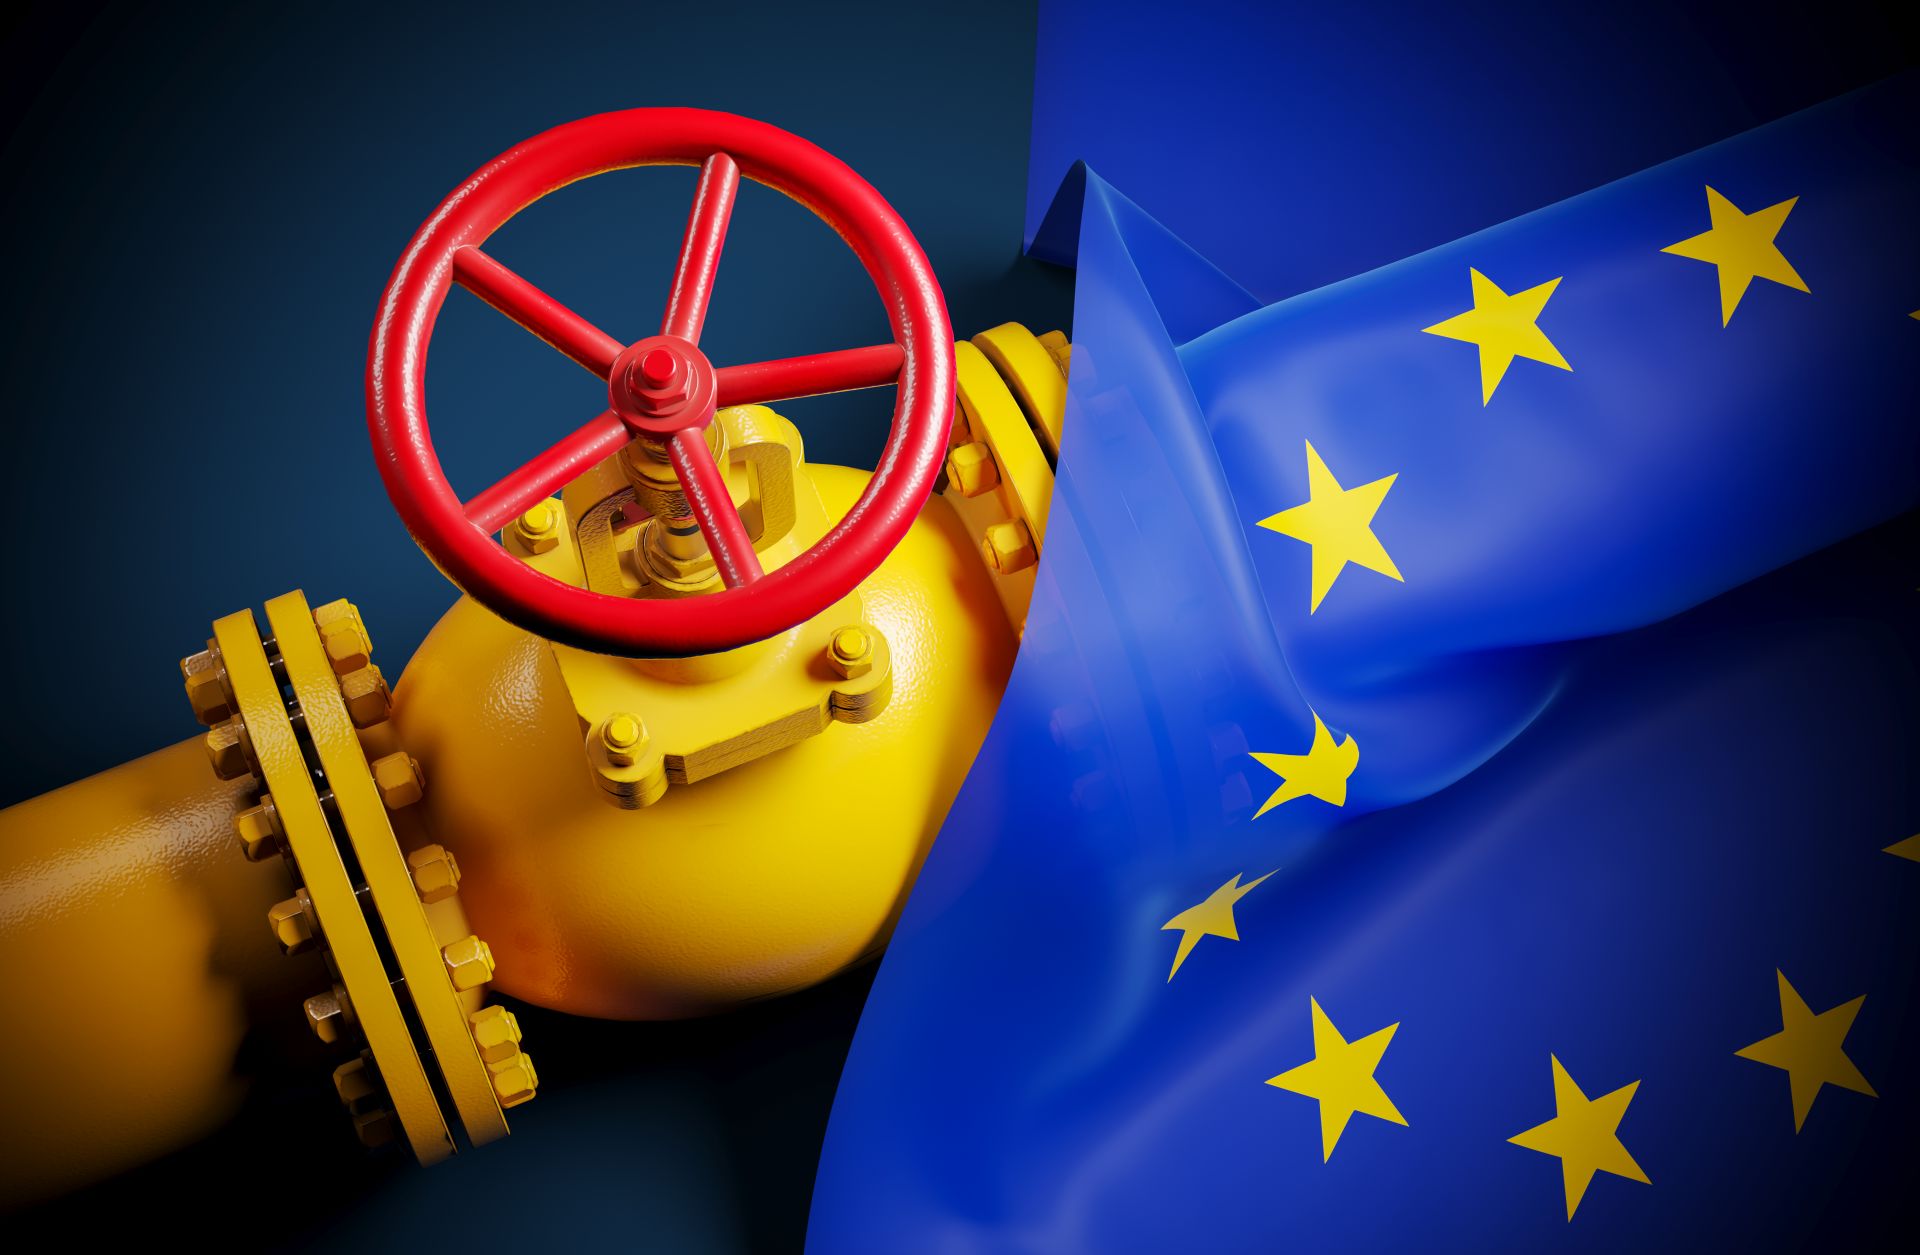 A 3D rendering of the European Union's flag and a gas valve on the Nord Stream natural gas pipeline.